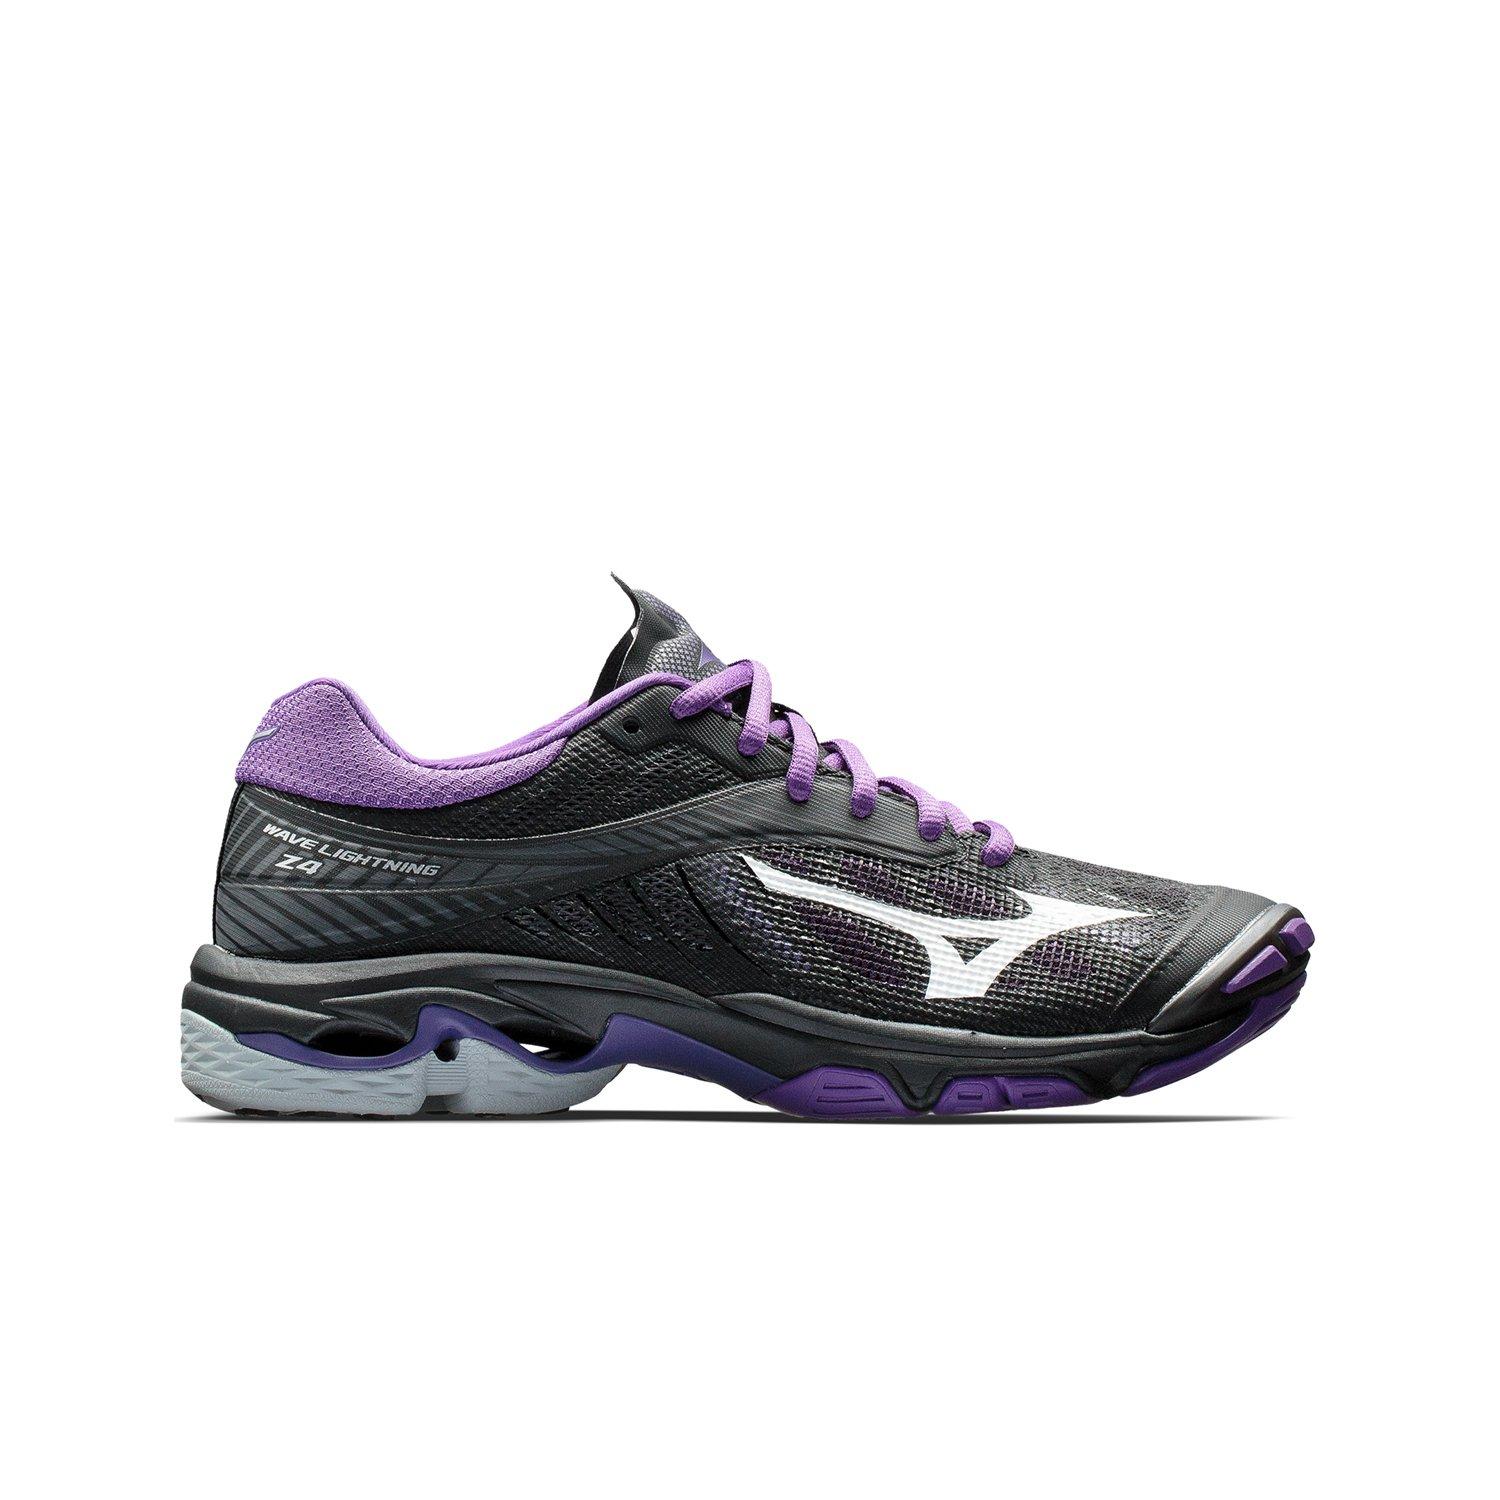 purple volleyball shoes